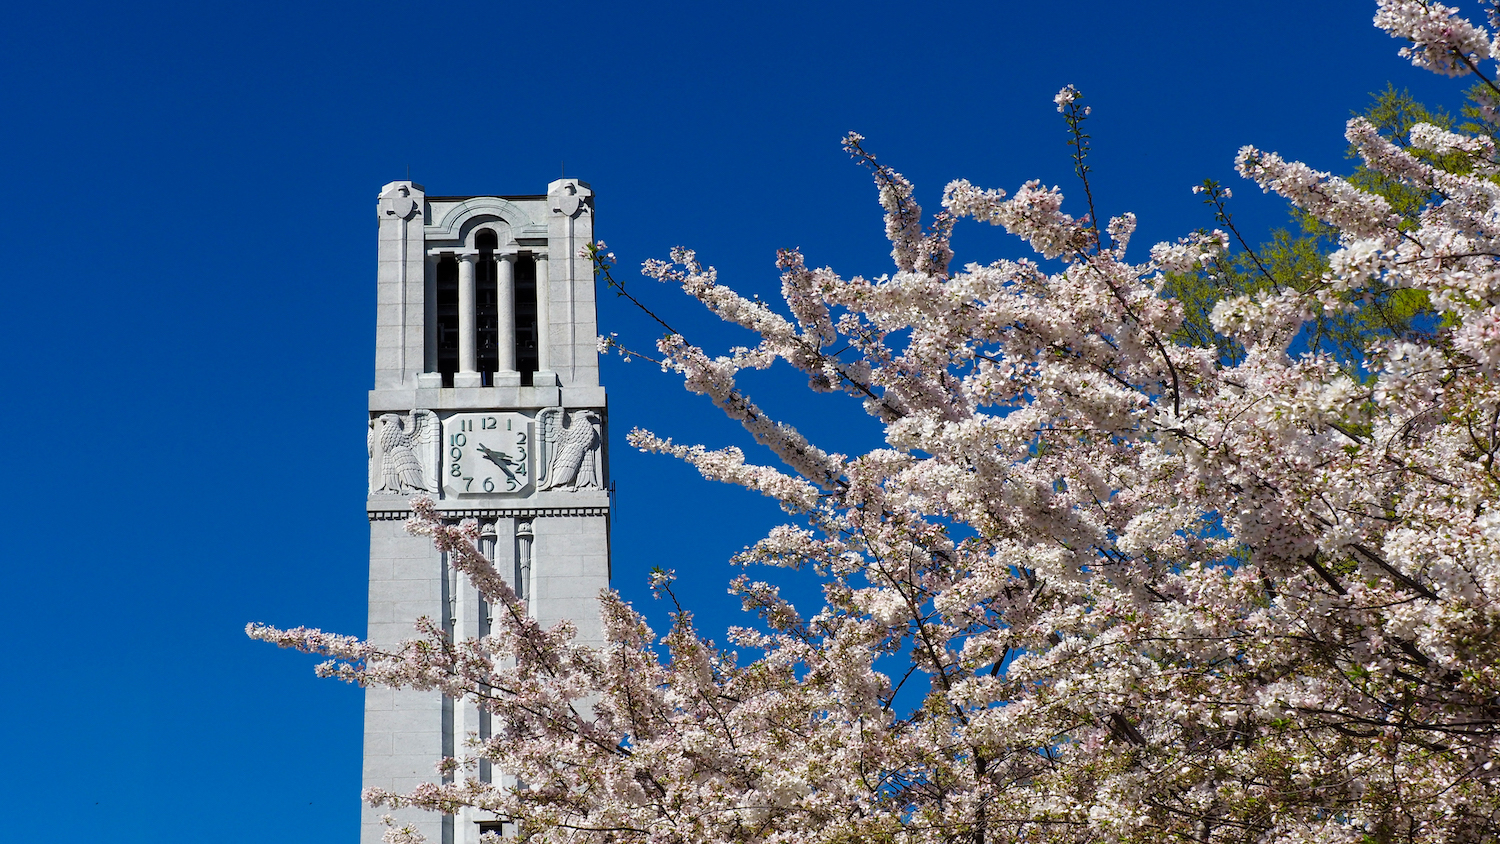 The NC State belltower stands, surrounded by blooms of spring.